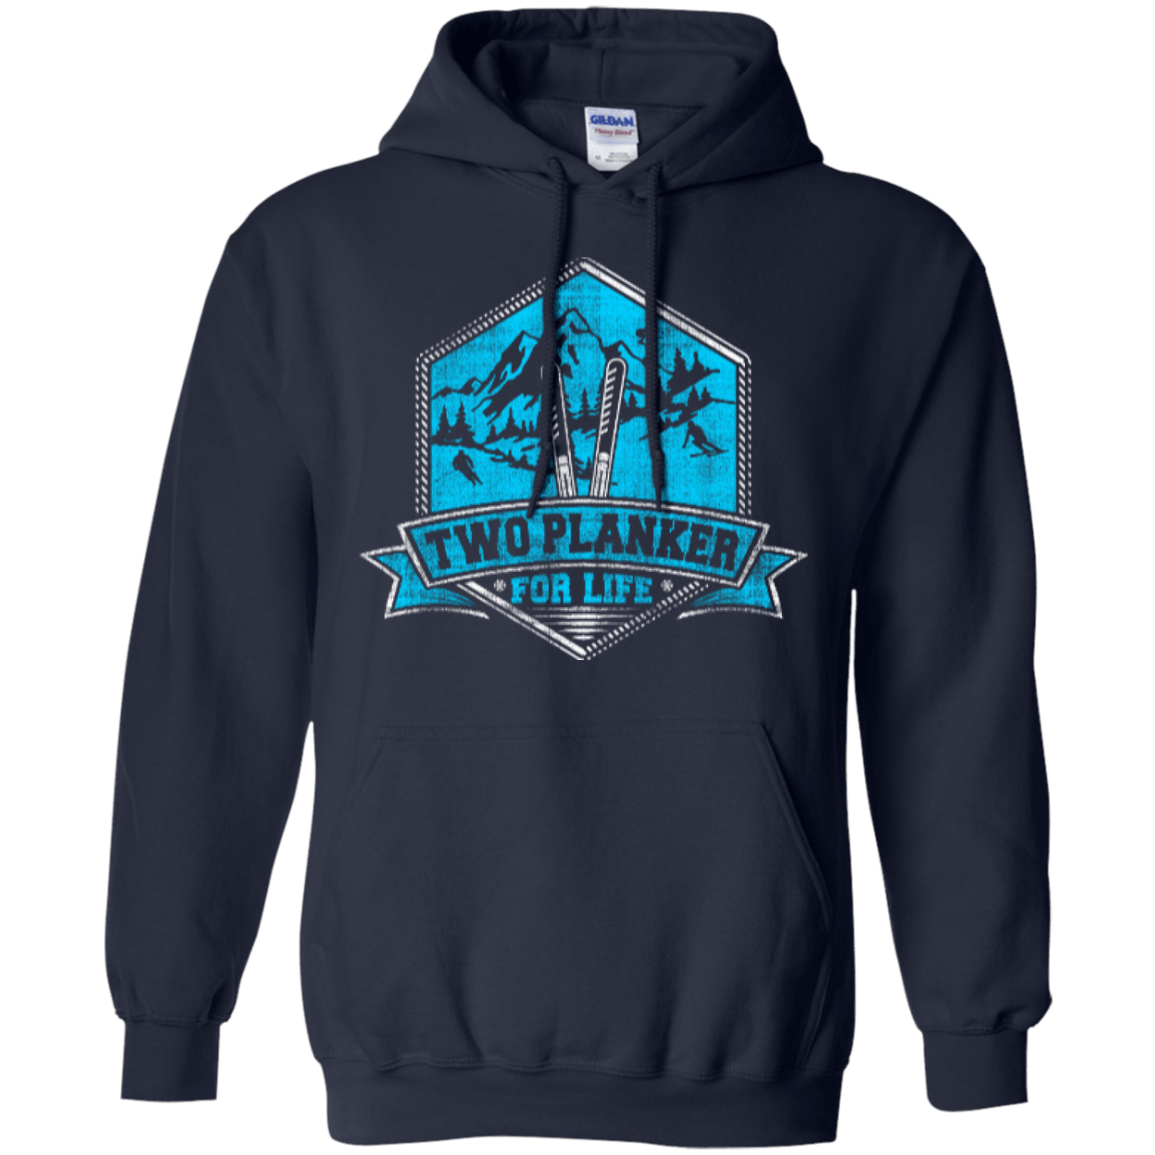 Two Plankers For Life Hoodies - Powderaddicts